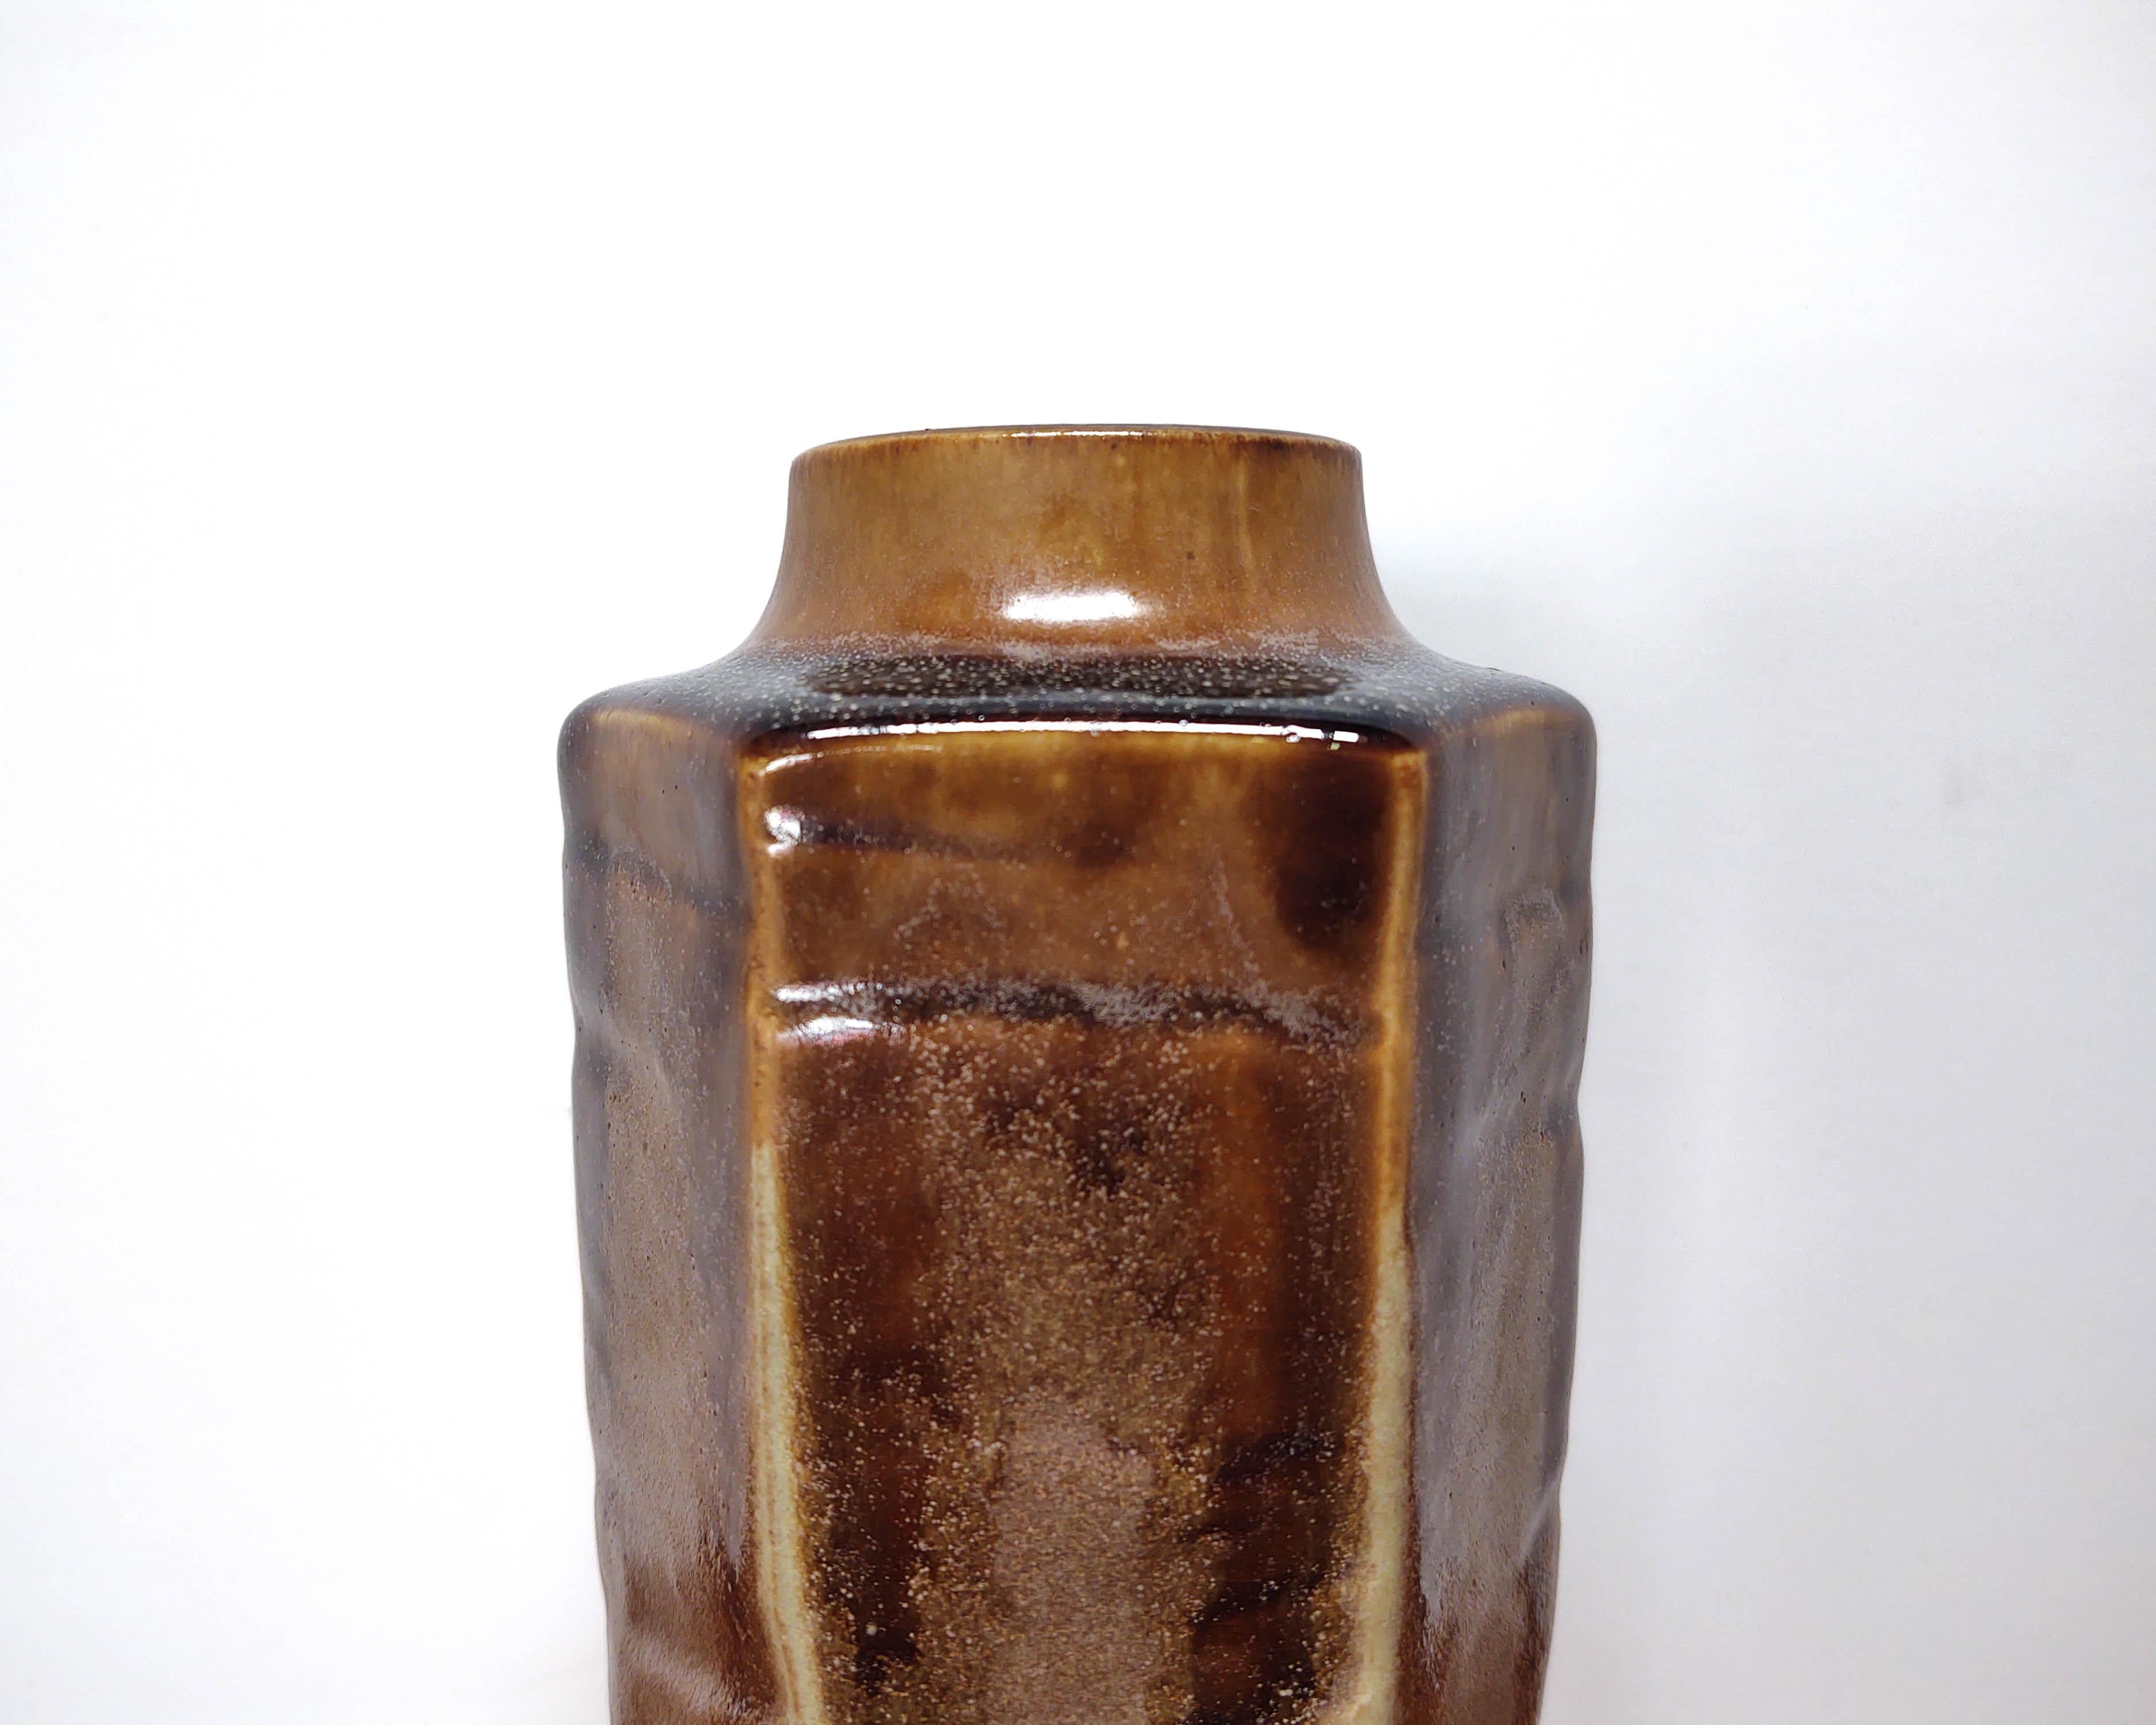 Tall Hexagonal Ceramic Porcelain Flower Vase with Earthy Glaze In Excellent Condition For Sale In Hawthorne, CA